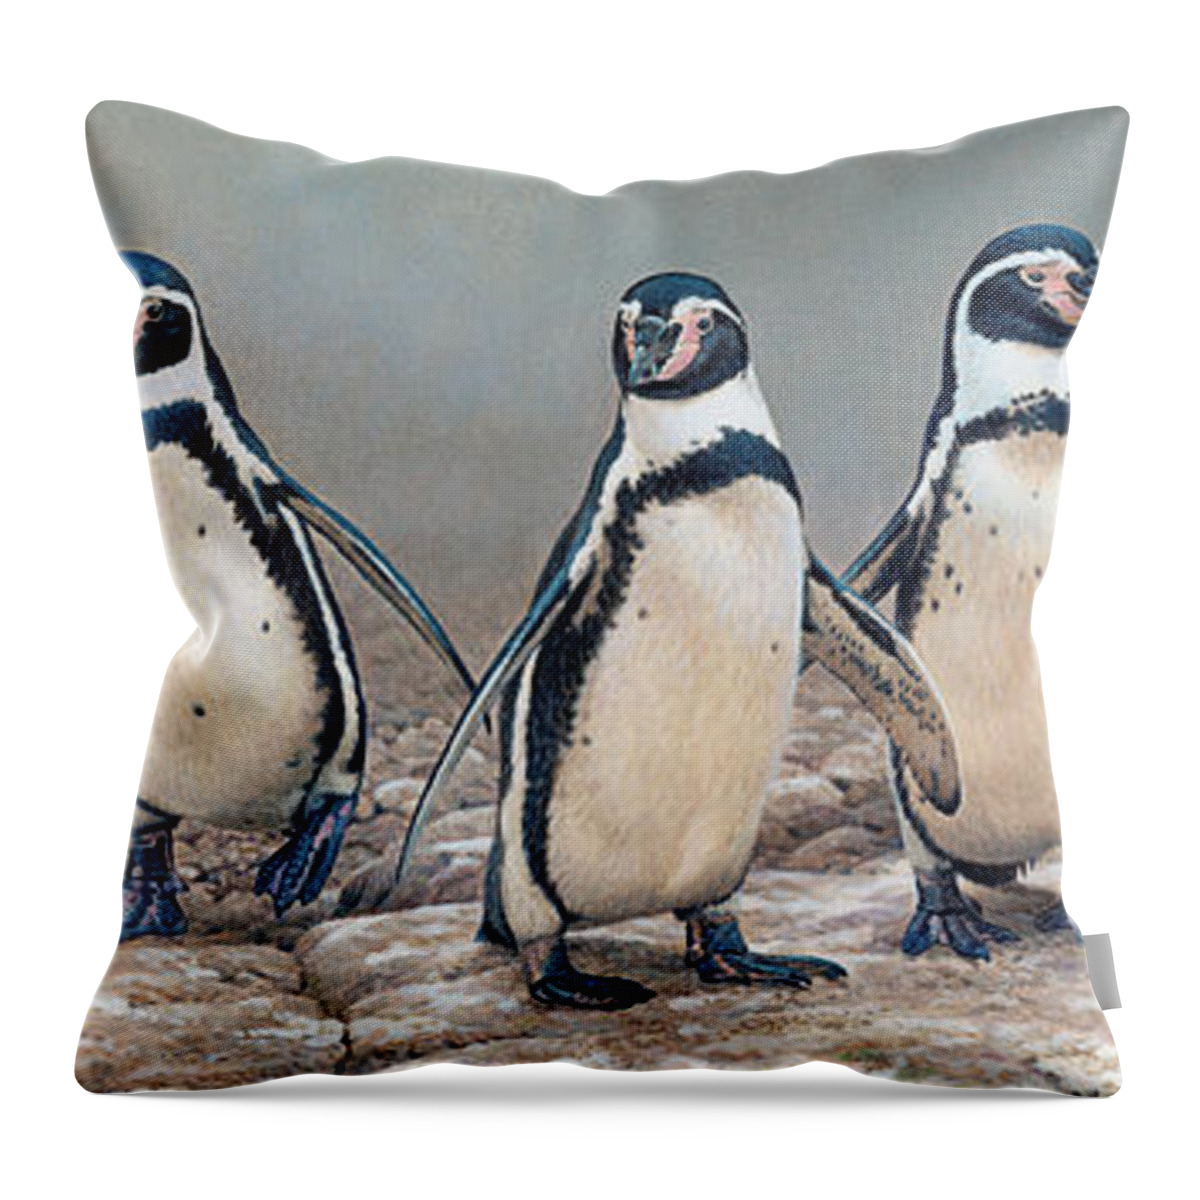 Animal Throw Pillow featuring the photograph Humboldt Penguins Standing In A Row by Ikon Ikon Images